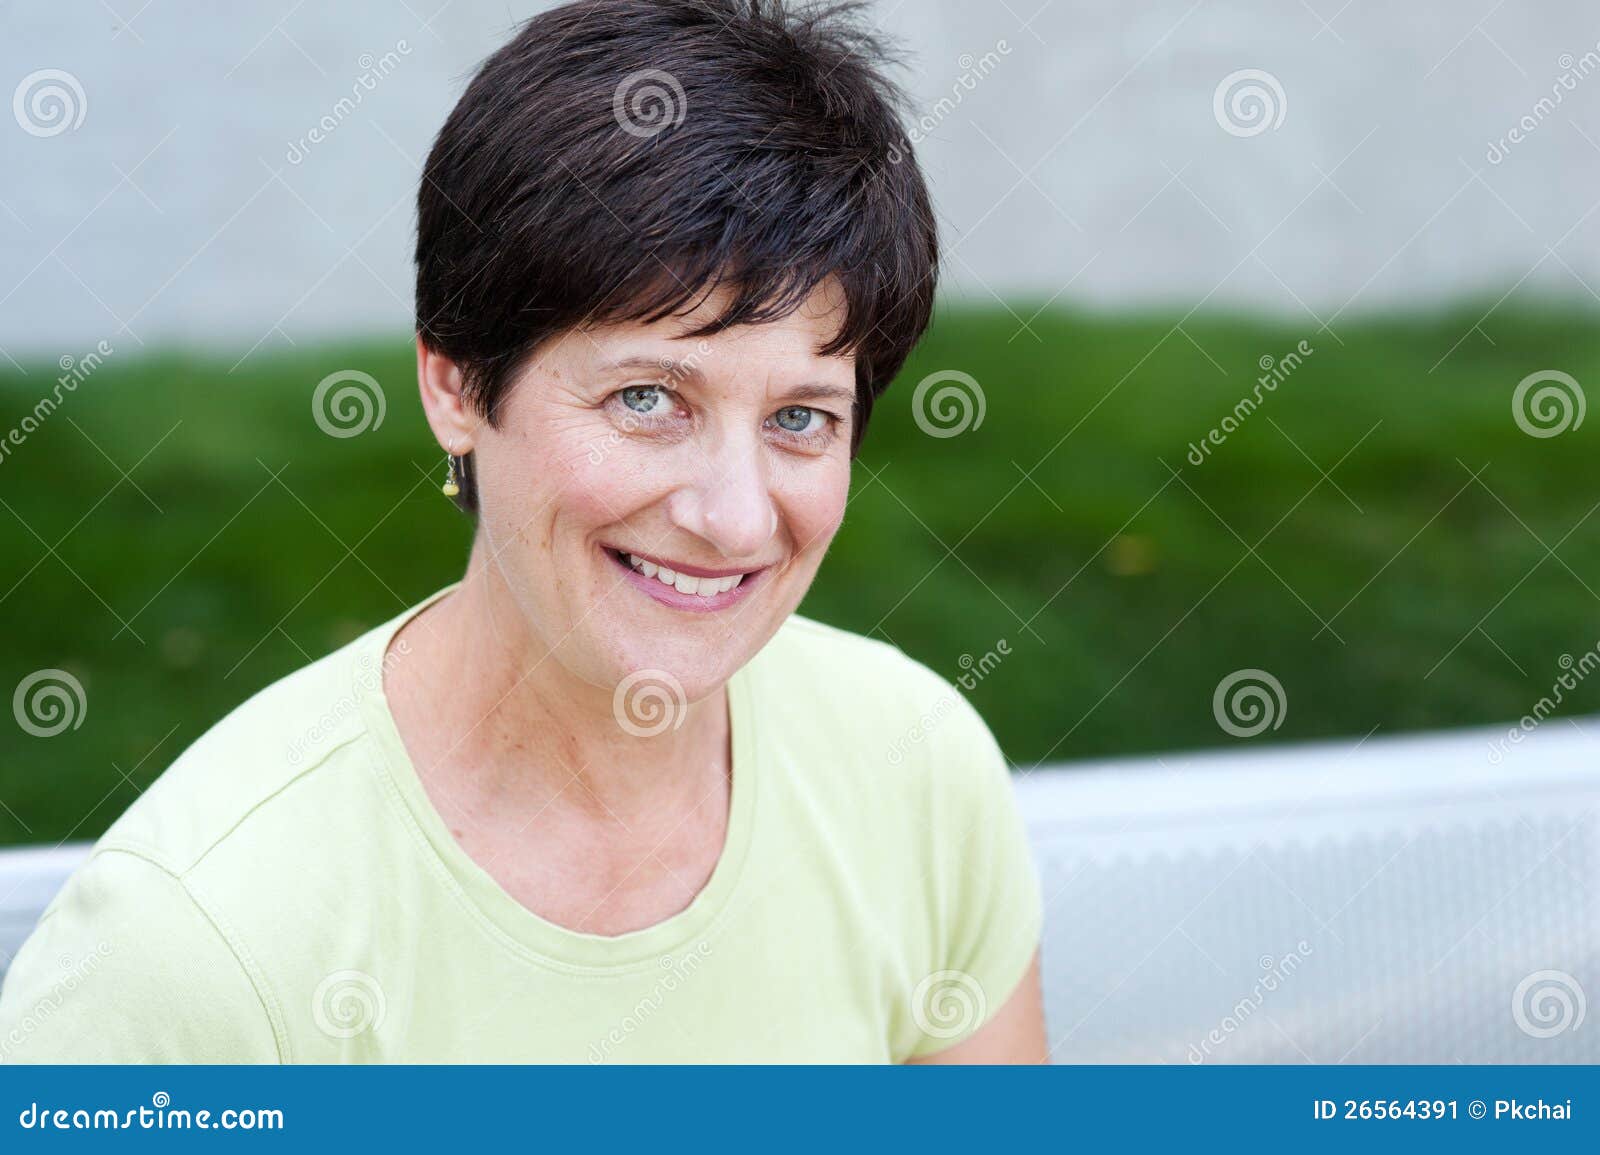 Portrait of a Smiling Mature Woman Stock Image - Image of cheerful ...